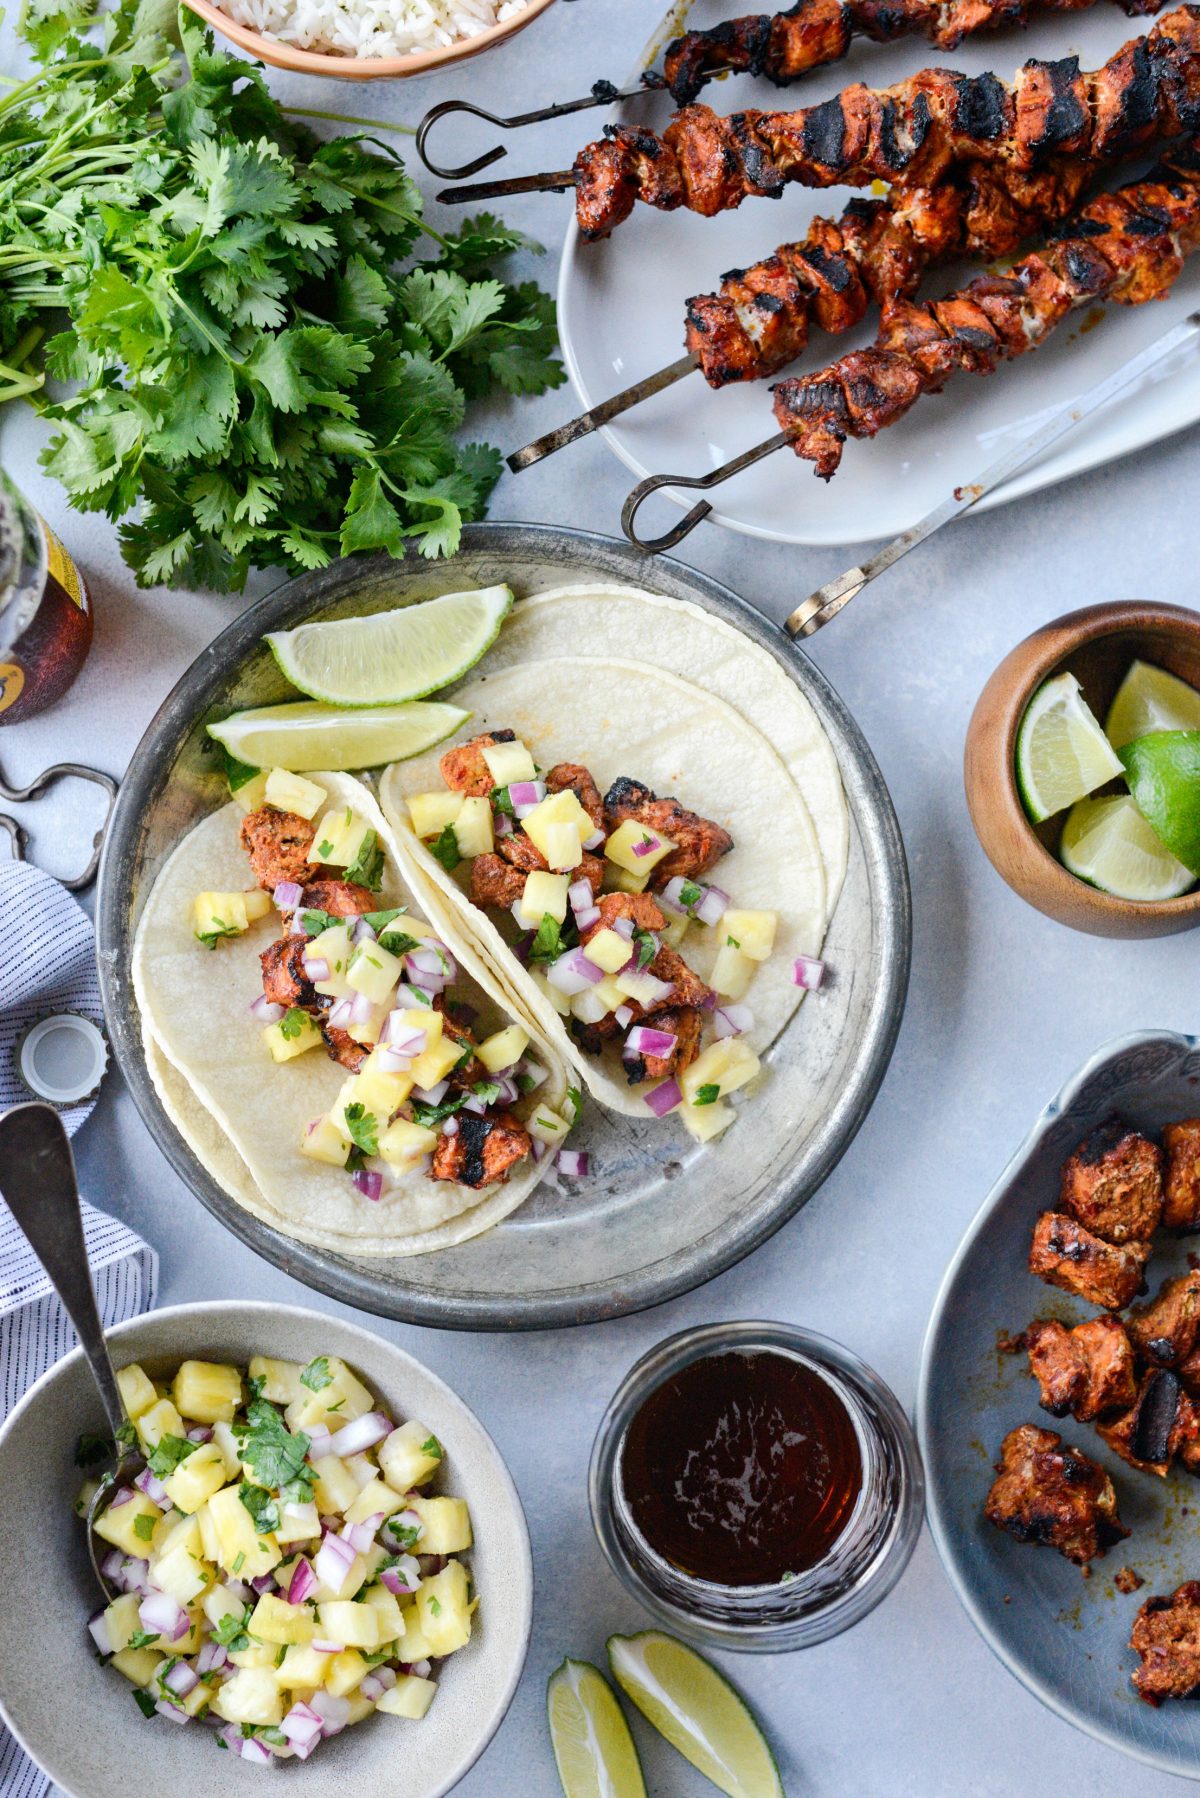 Easy Tacos al Pastor with Pineapple Salsa